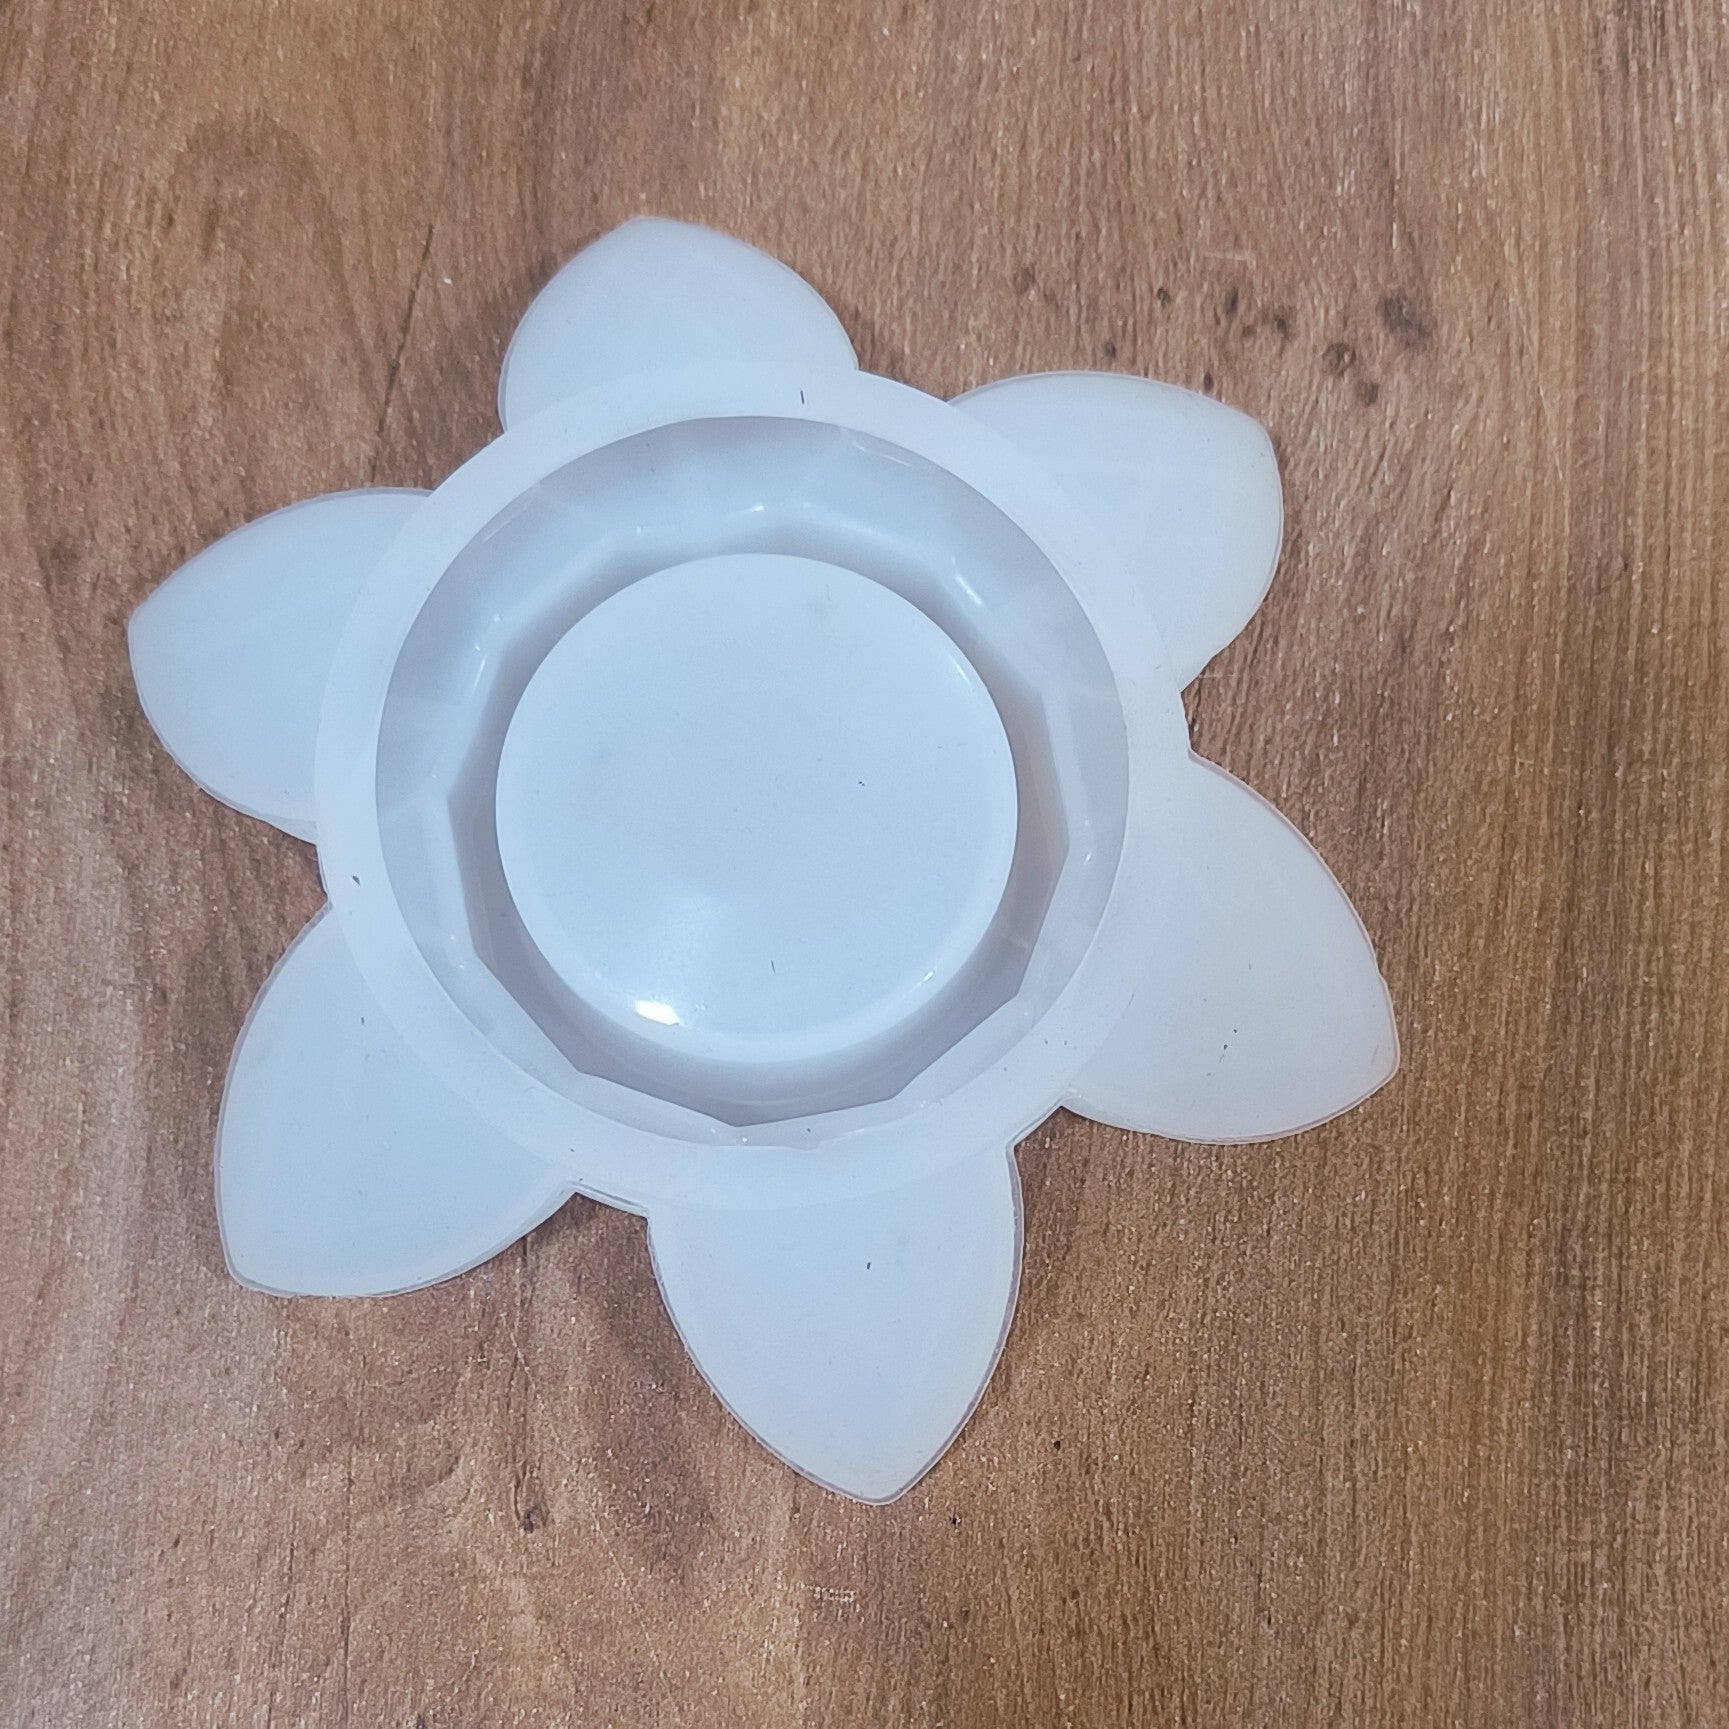 105mm Silicone Mold Lotus Shape Tealight Candle Holder